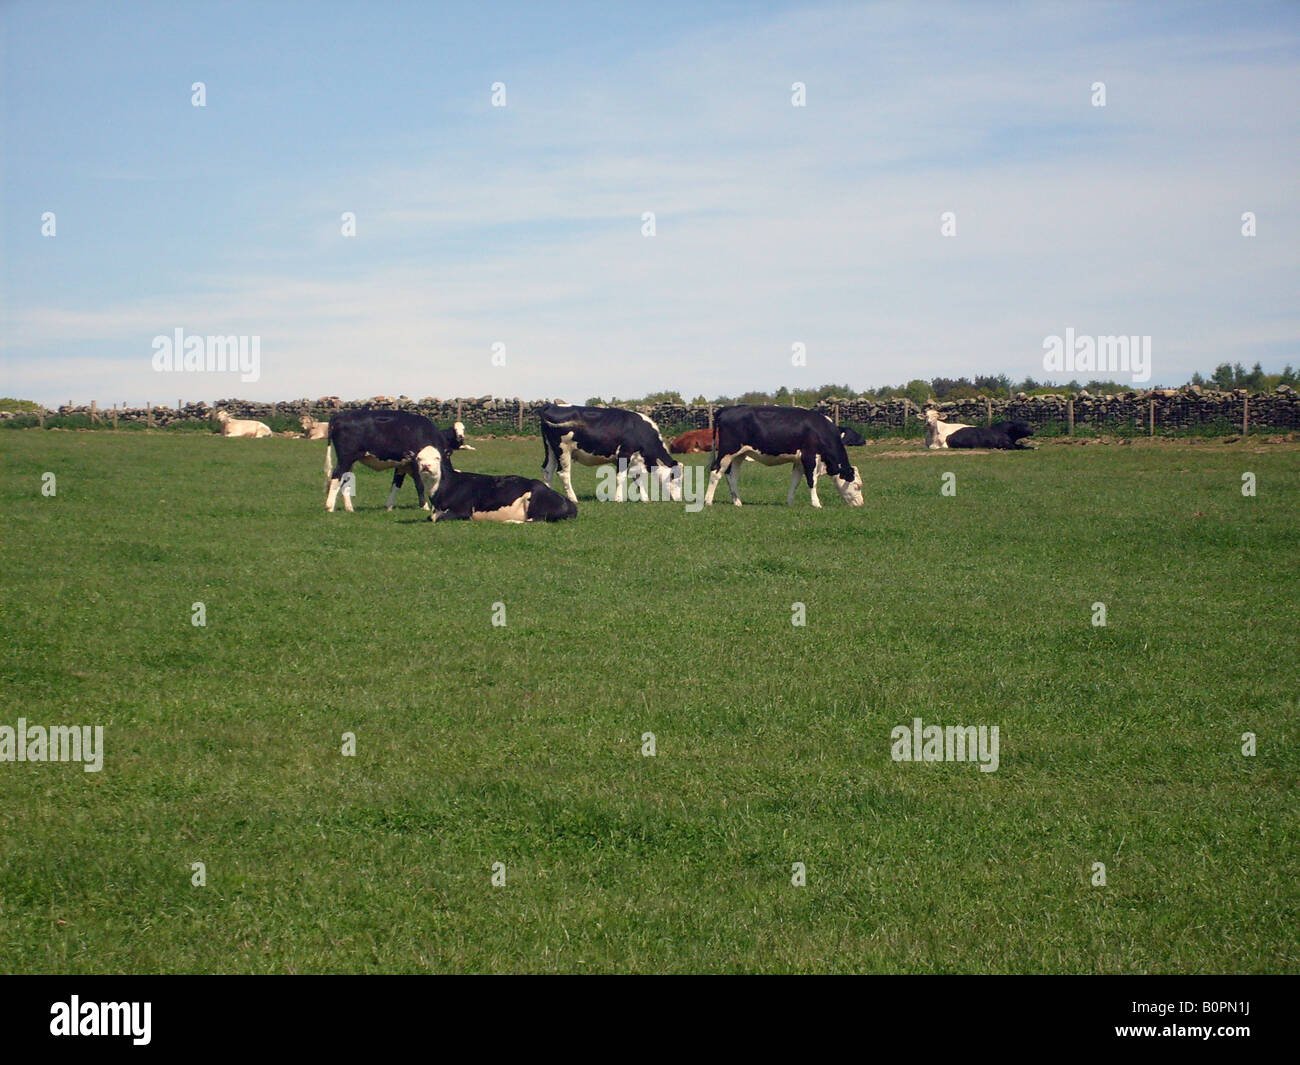 Cows grazing in countryside in rural agriculture scene, North Yorkshire Moors National Park, England. Stock Photo